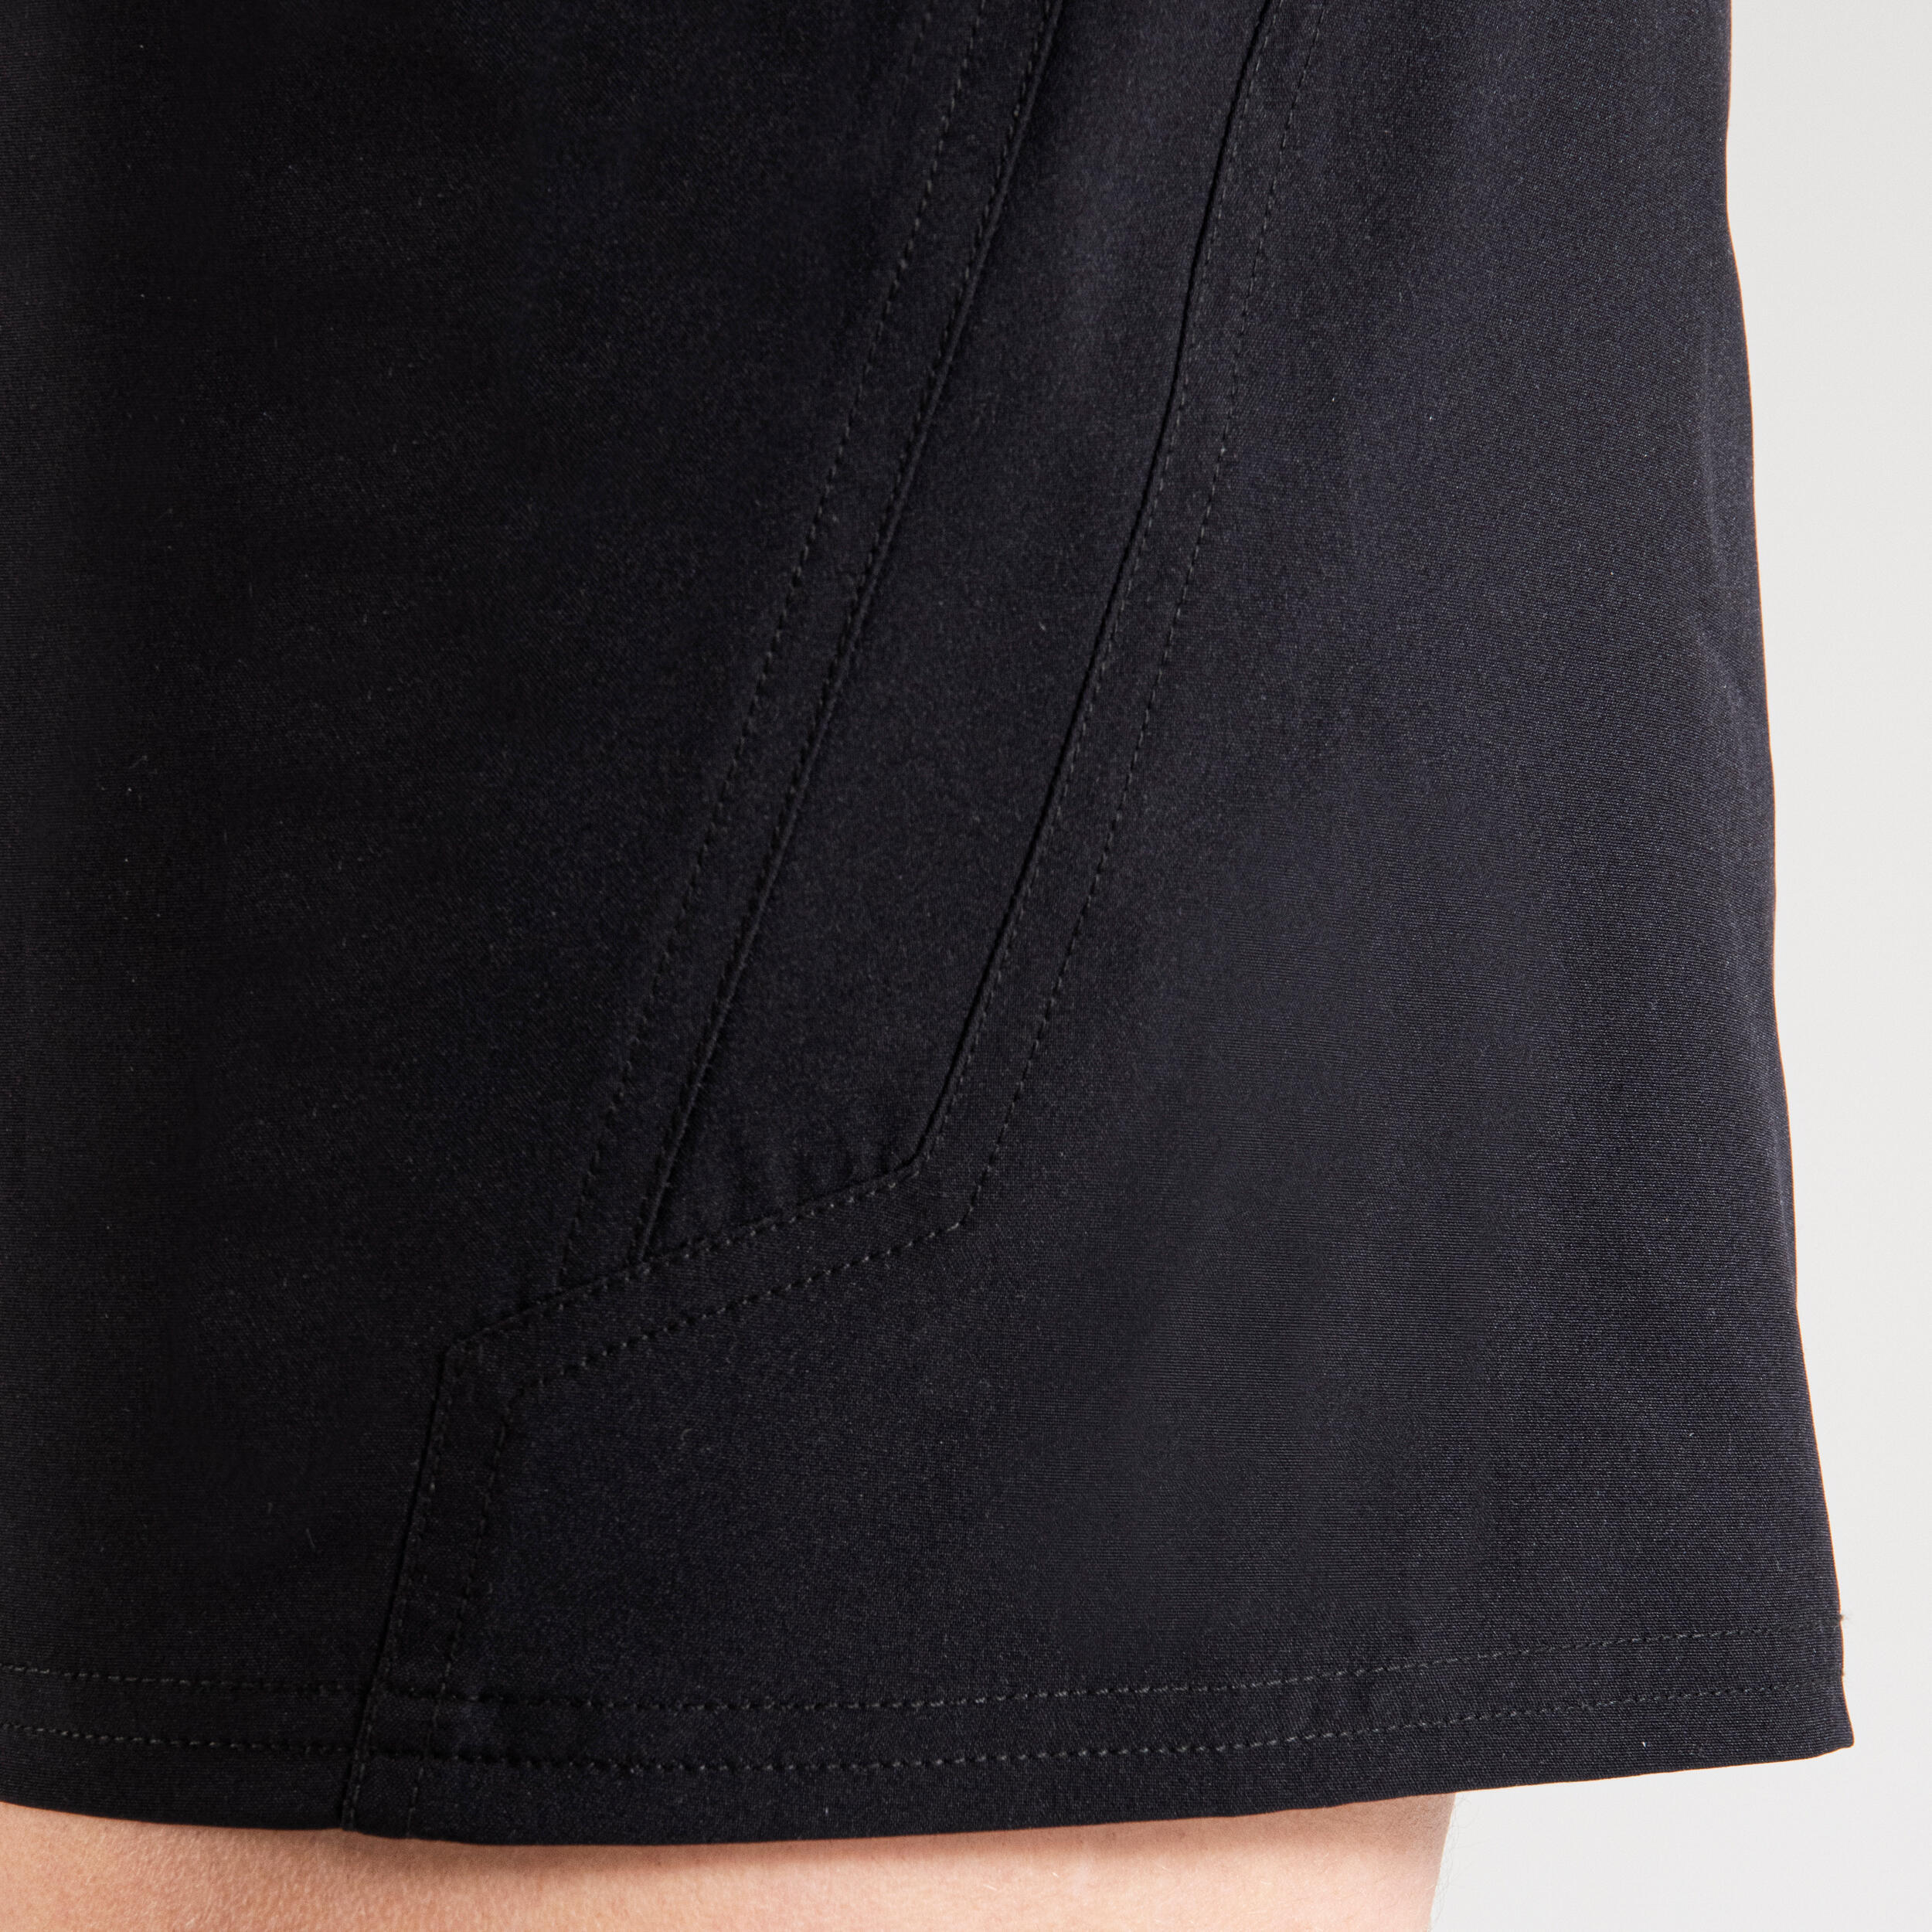 Women's Rugby Shorts R500 - Black 10/10